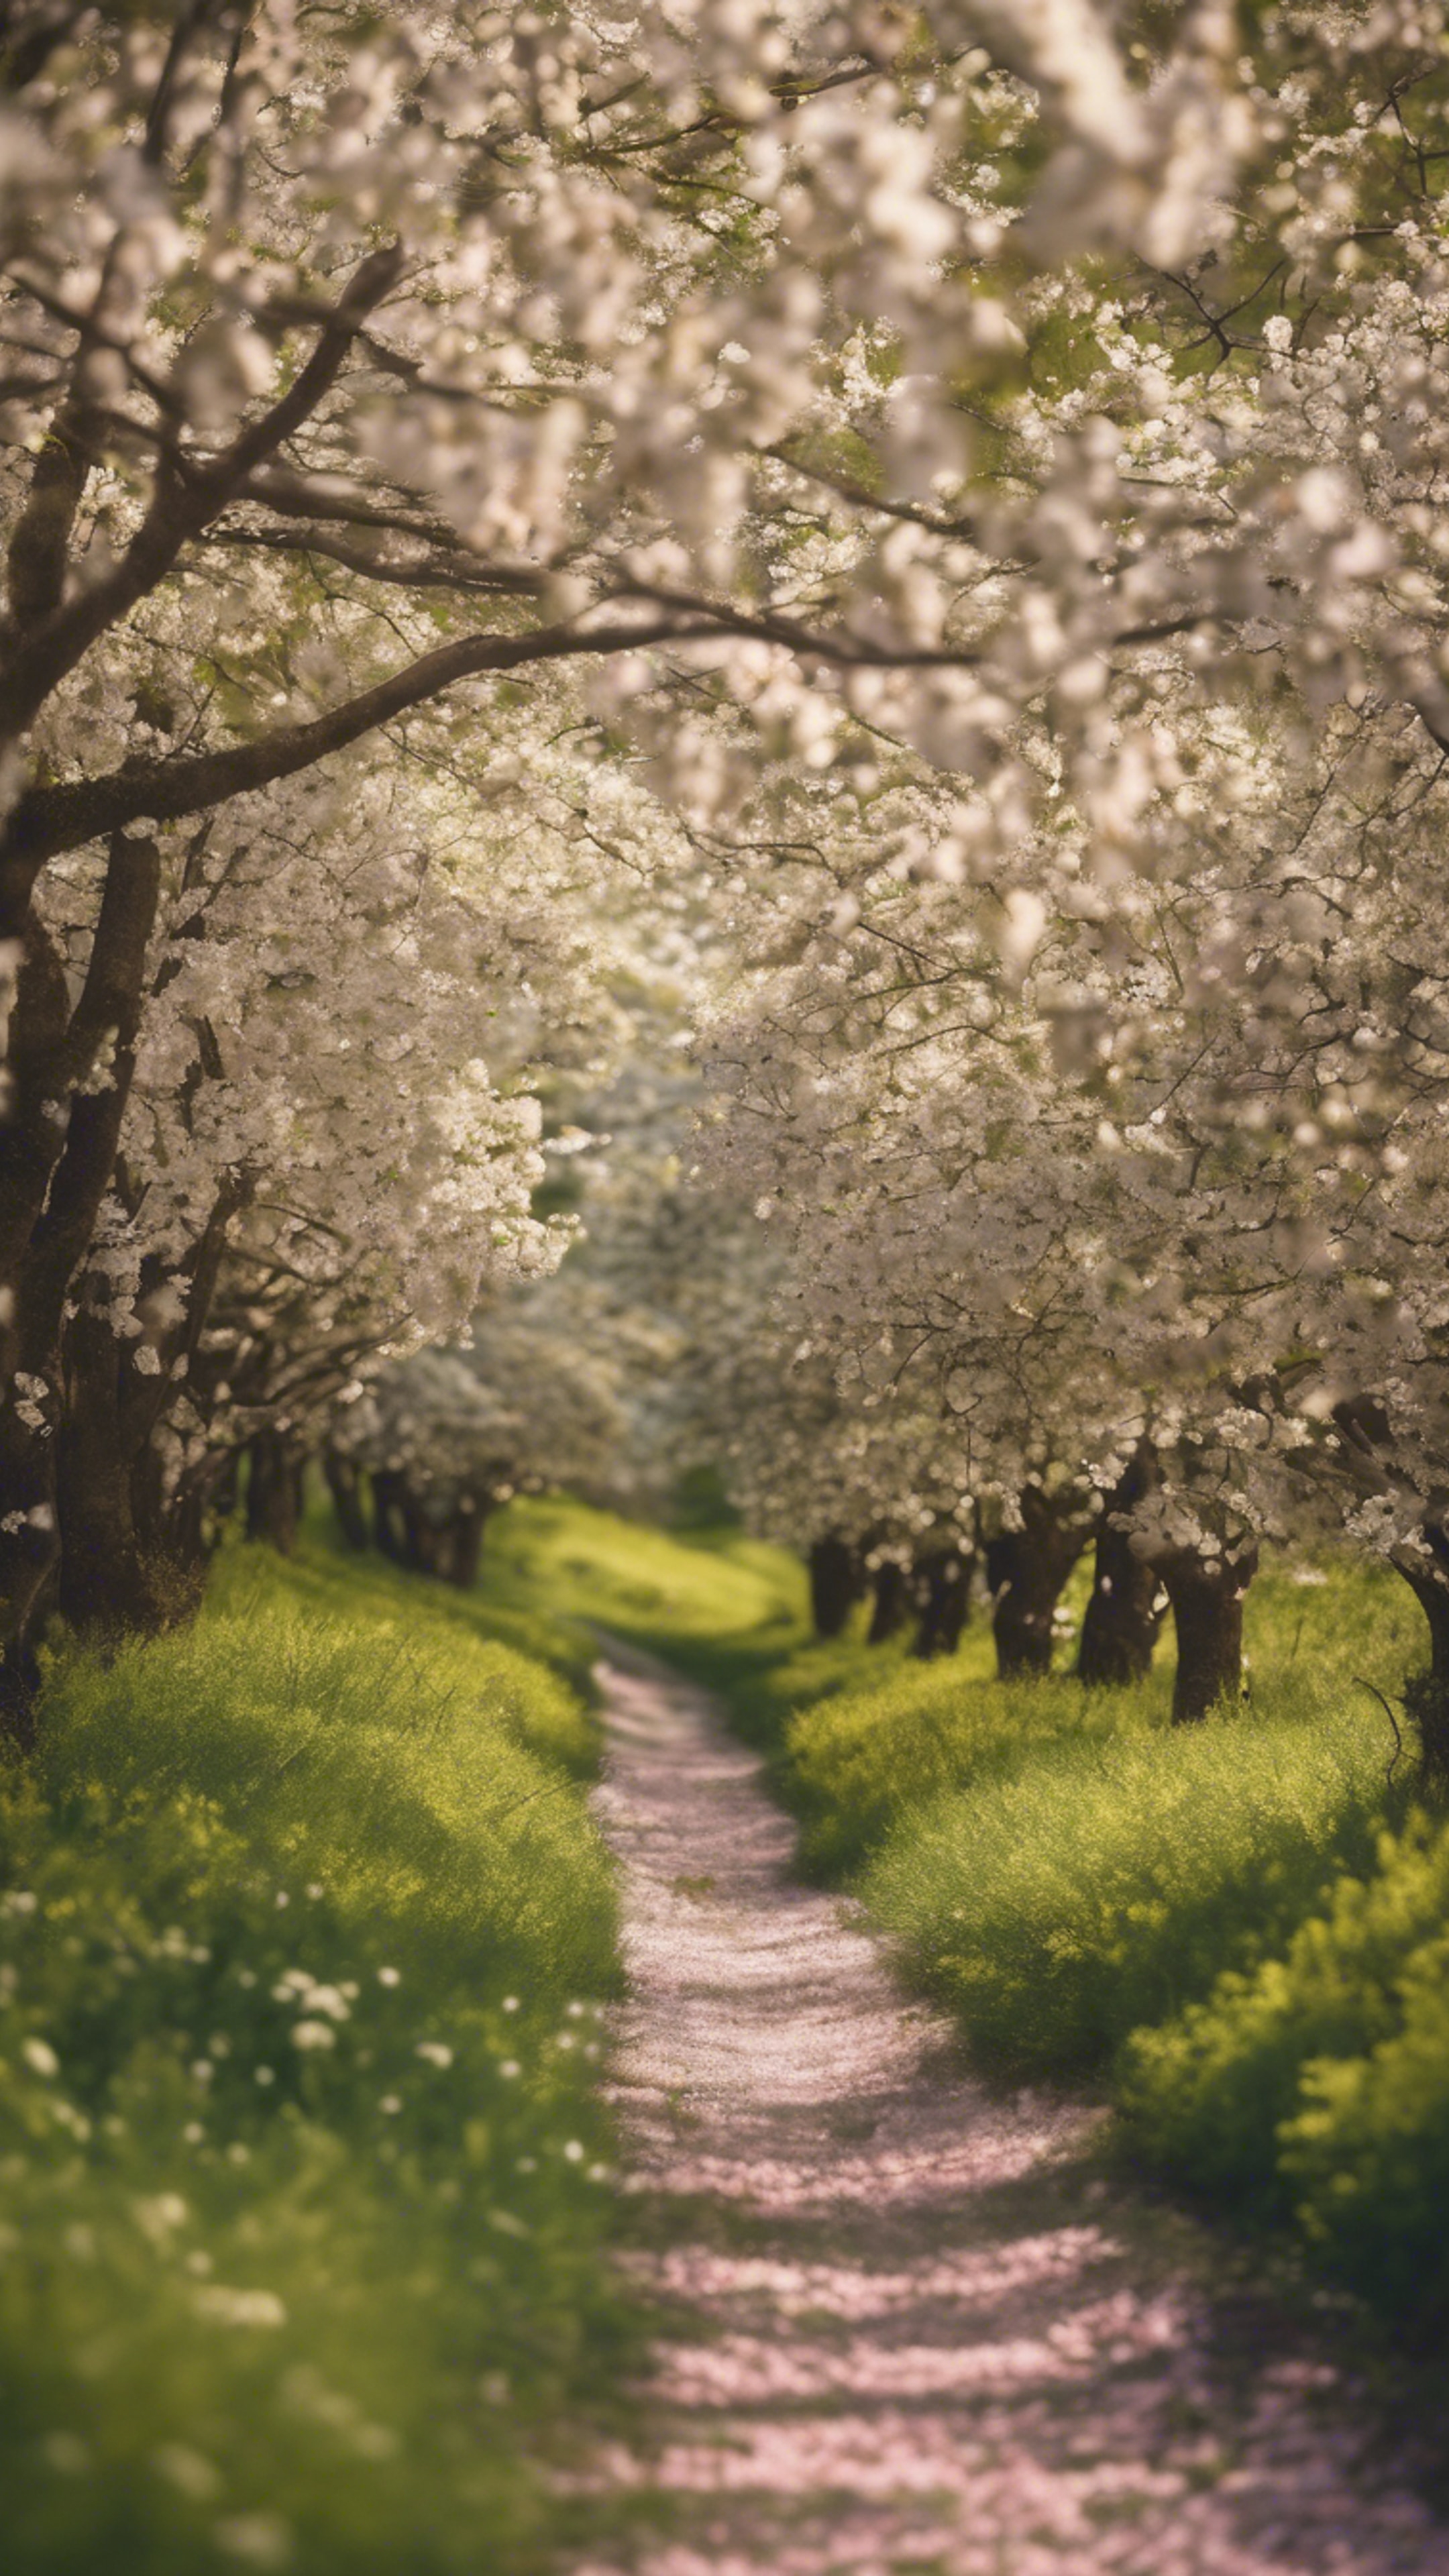 A grassy path winding through a forest of flowering dogwood trees. Wallpaper[d373734920ac4560a386]